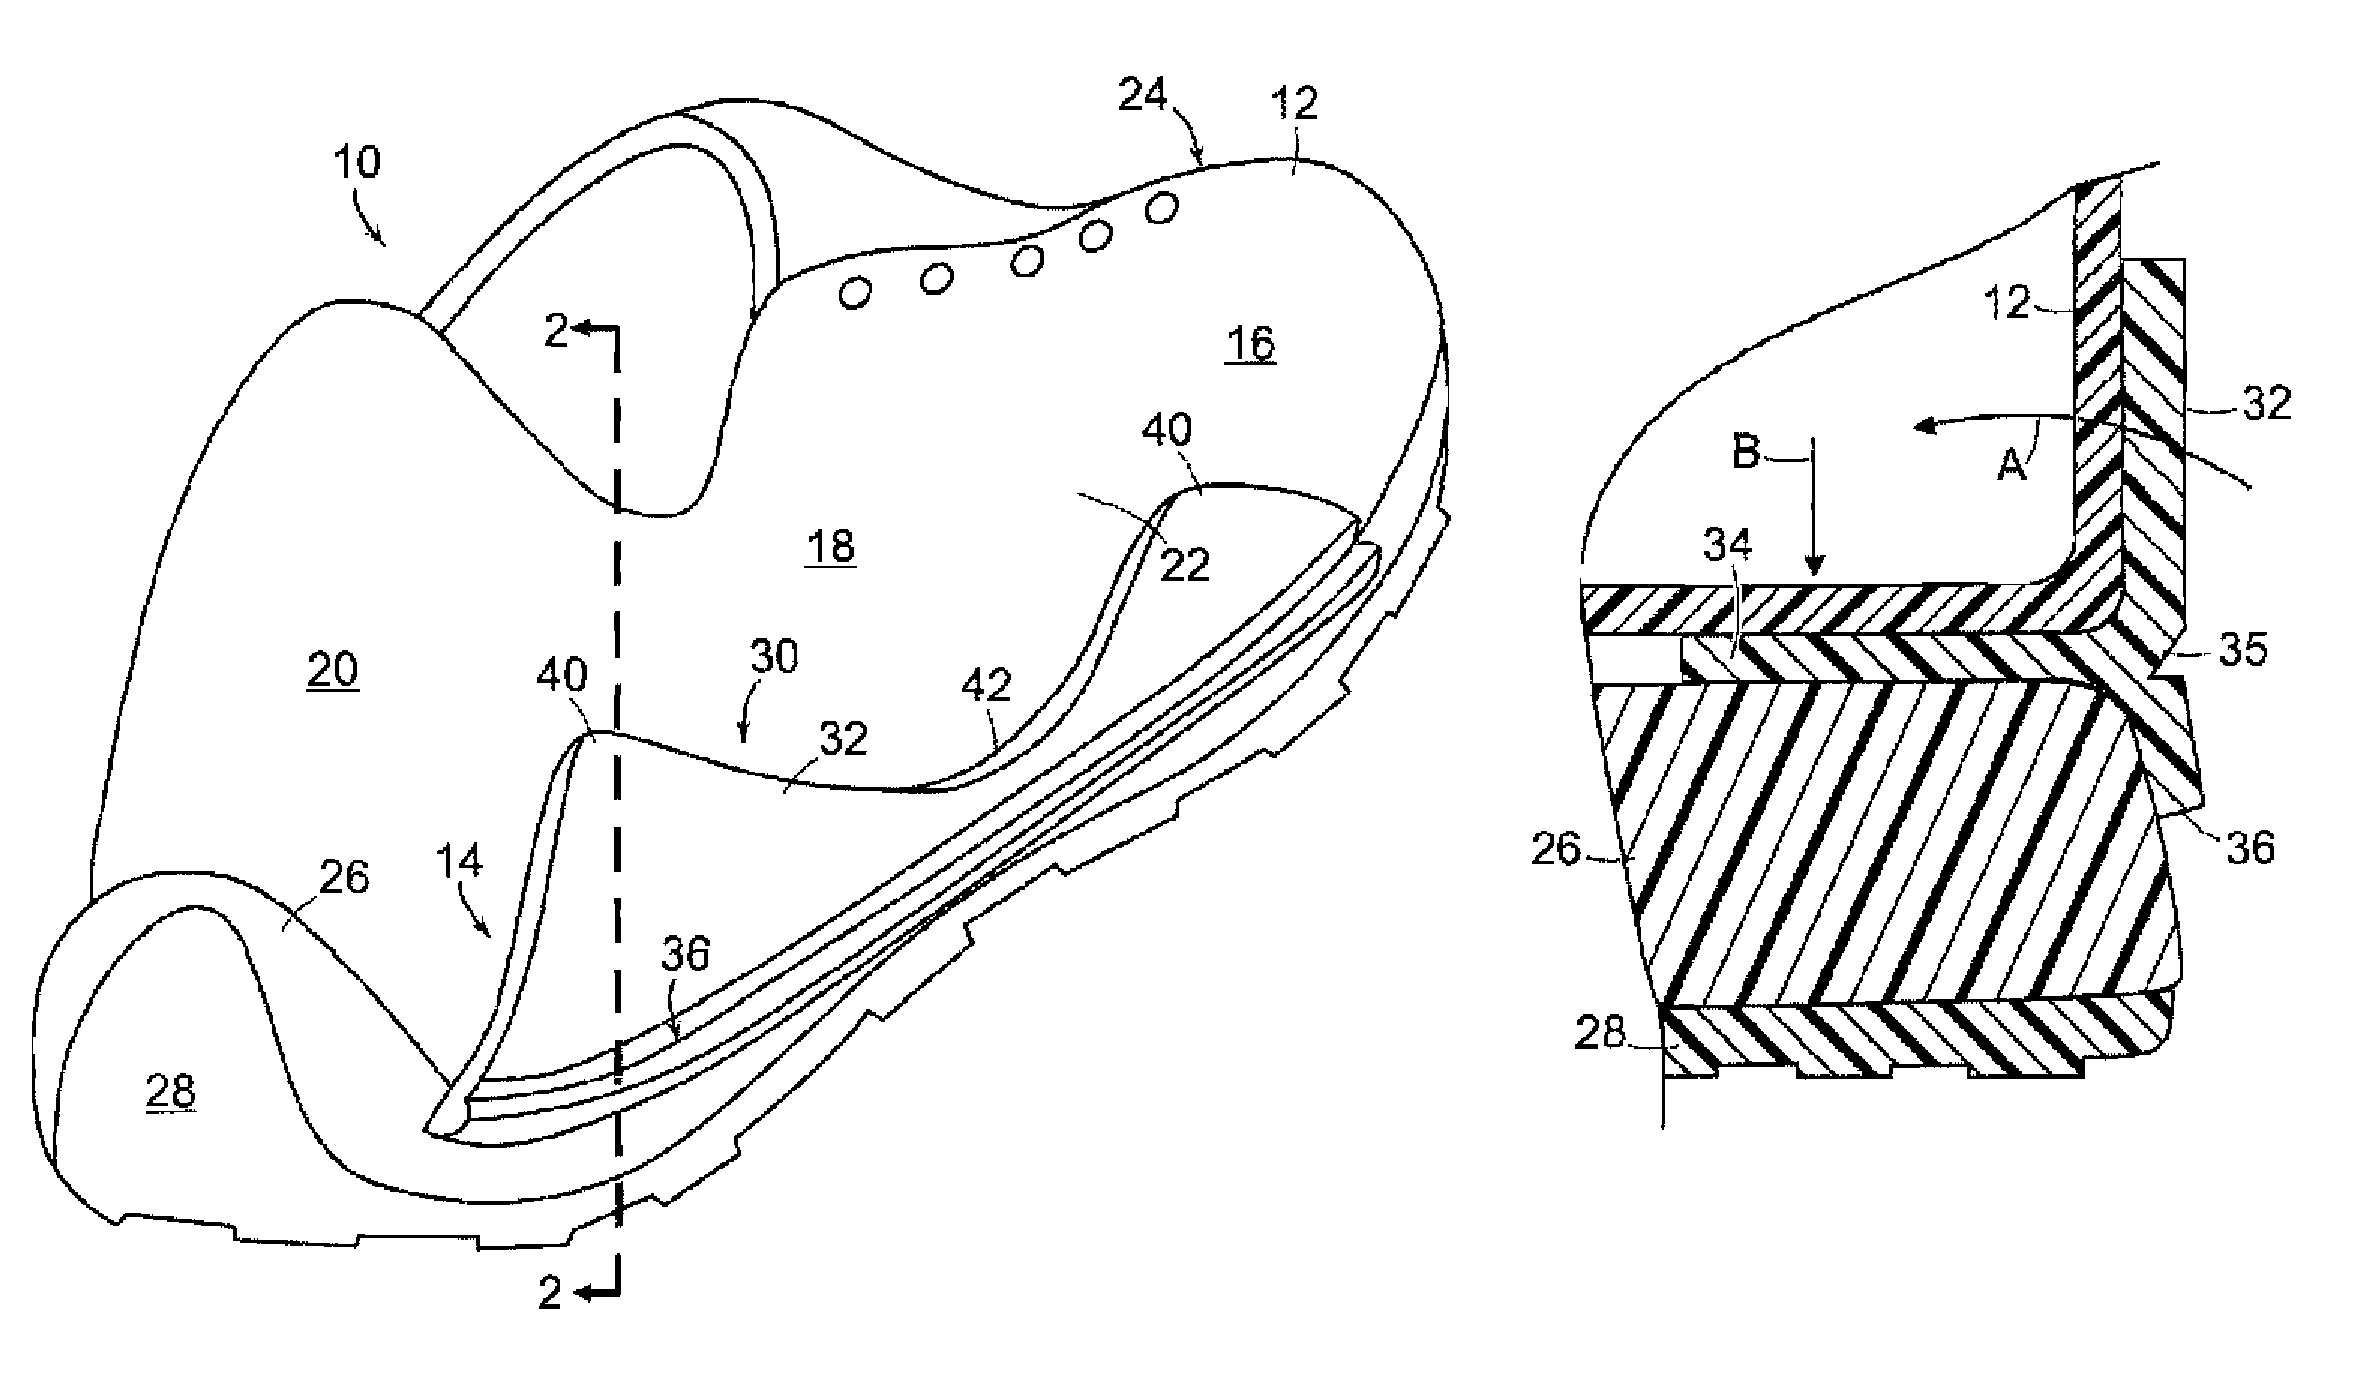 Footwear with support plate assembly